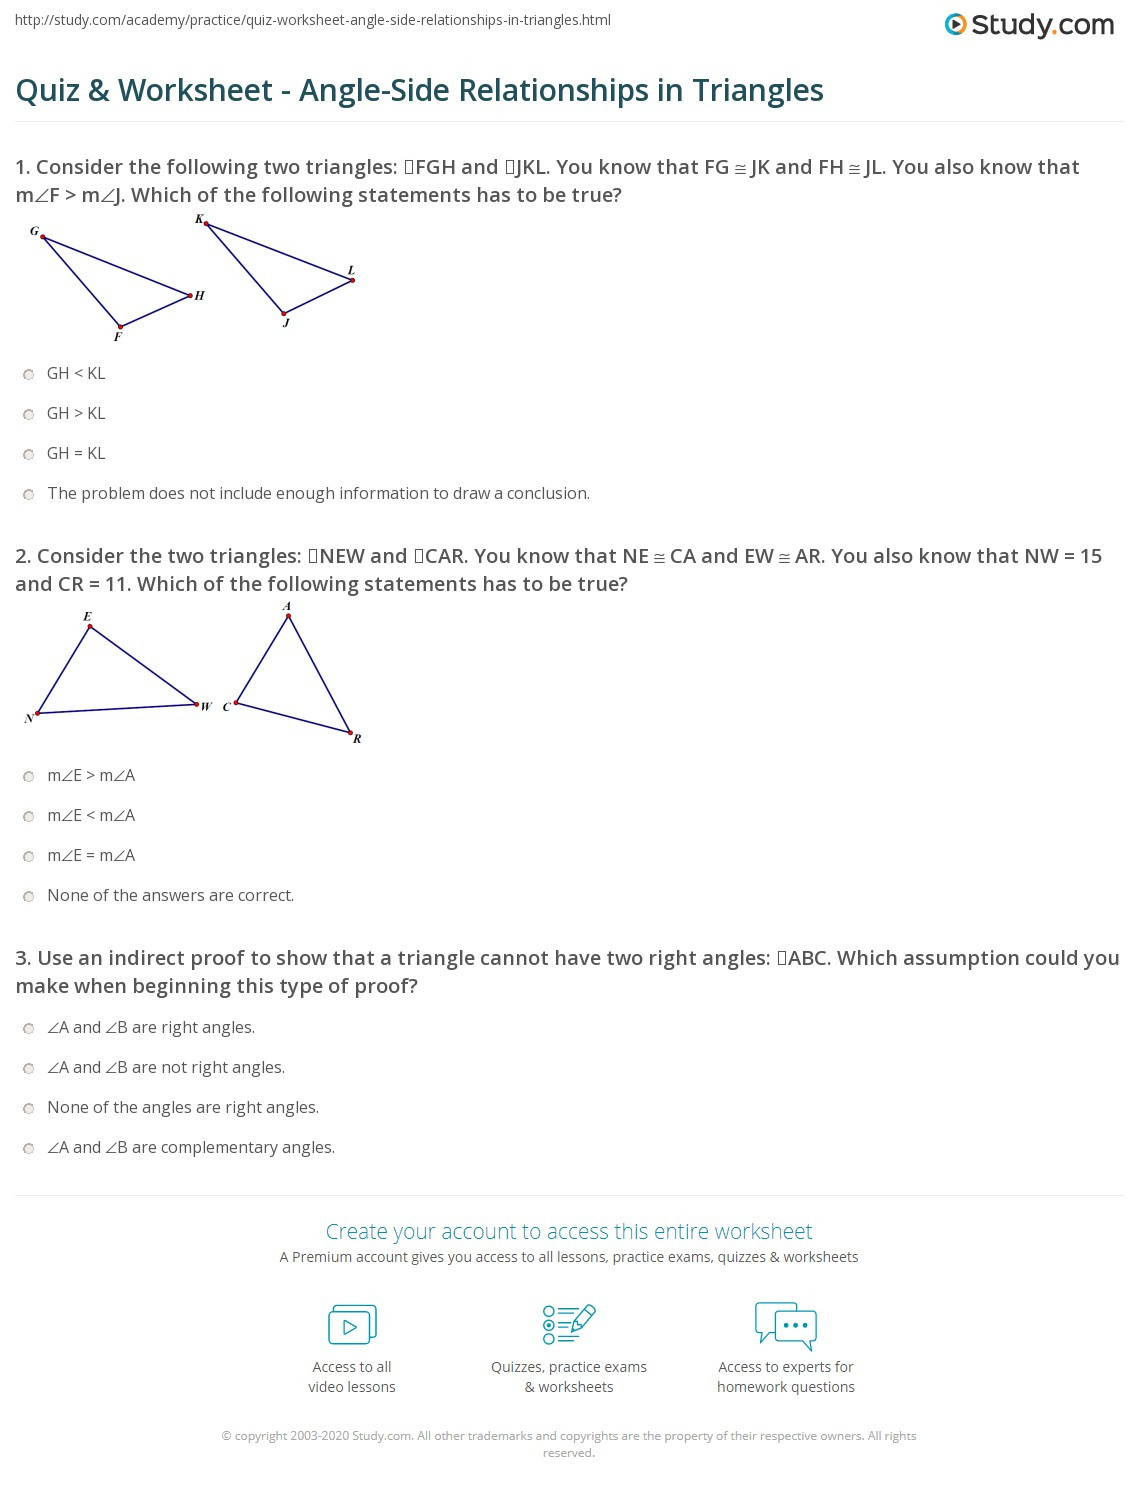 Geometry Worksheet Beginning Proofs Quiz &amp; Worksheet Angle Side Relationships In Triangles